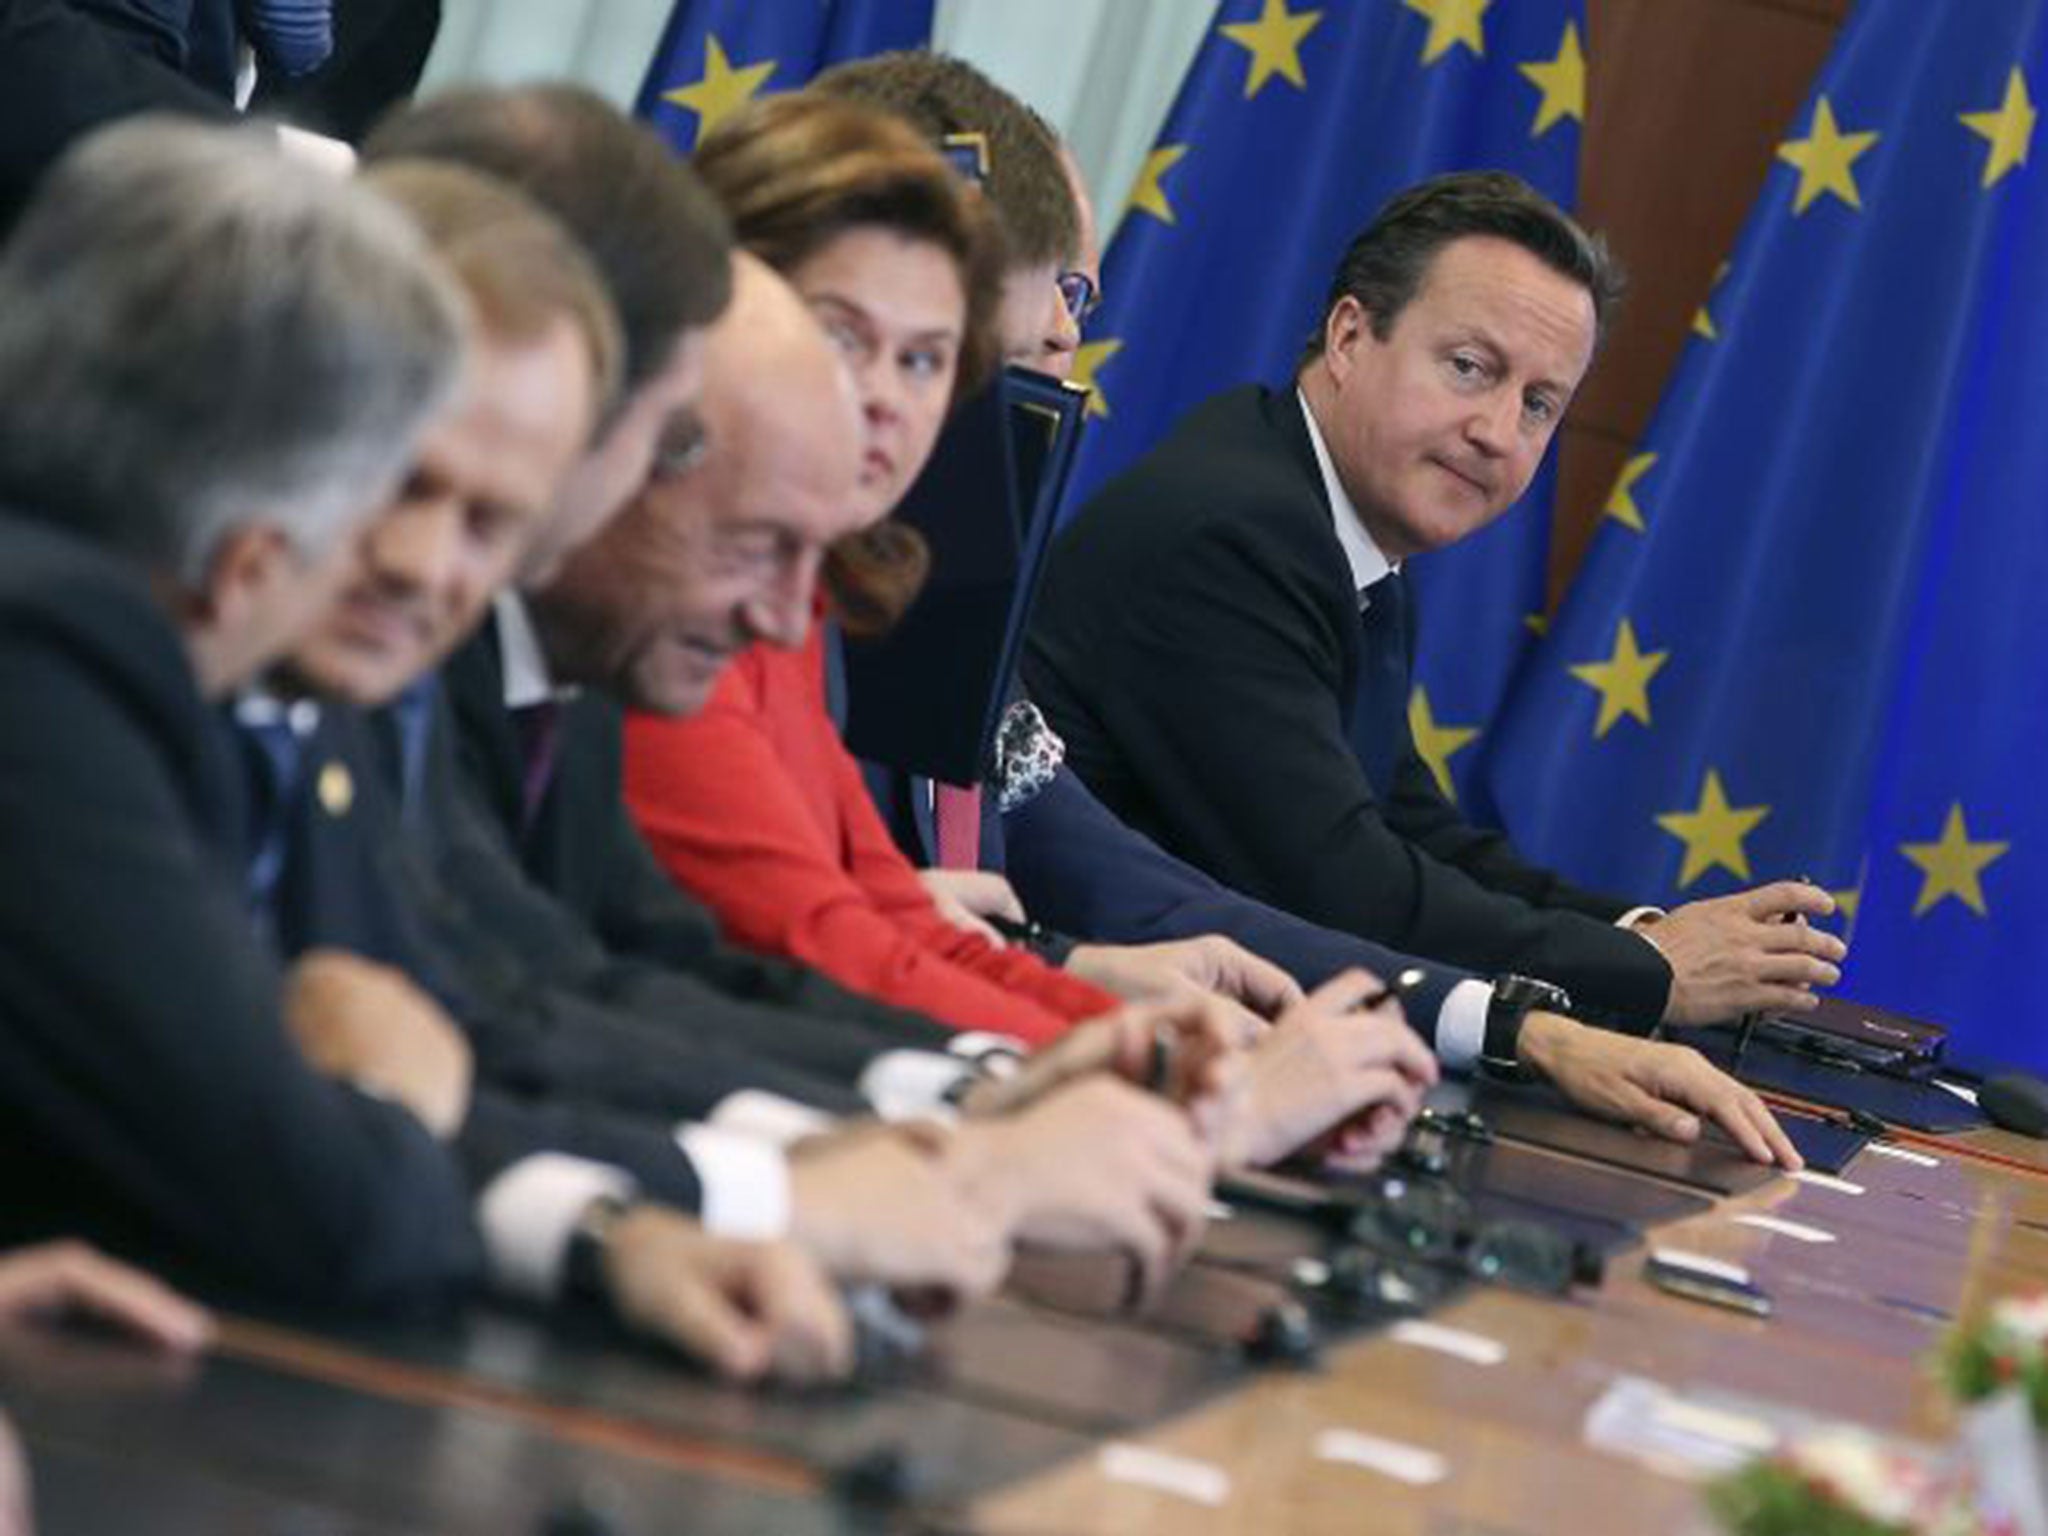 Cameron at the EU summit last week: he was doomed to try and fail in his mission to block the appointment of Juncker